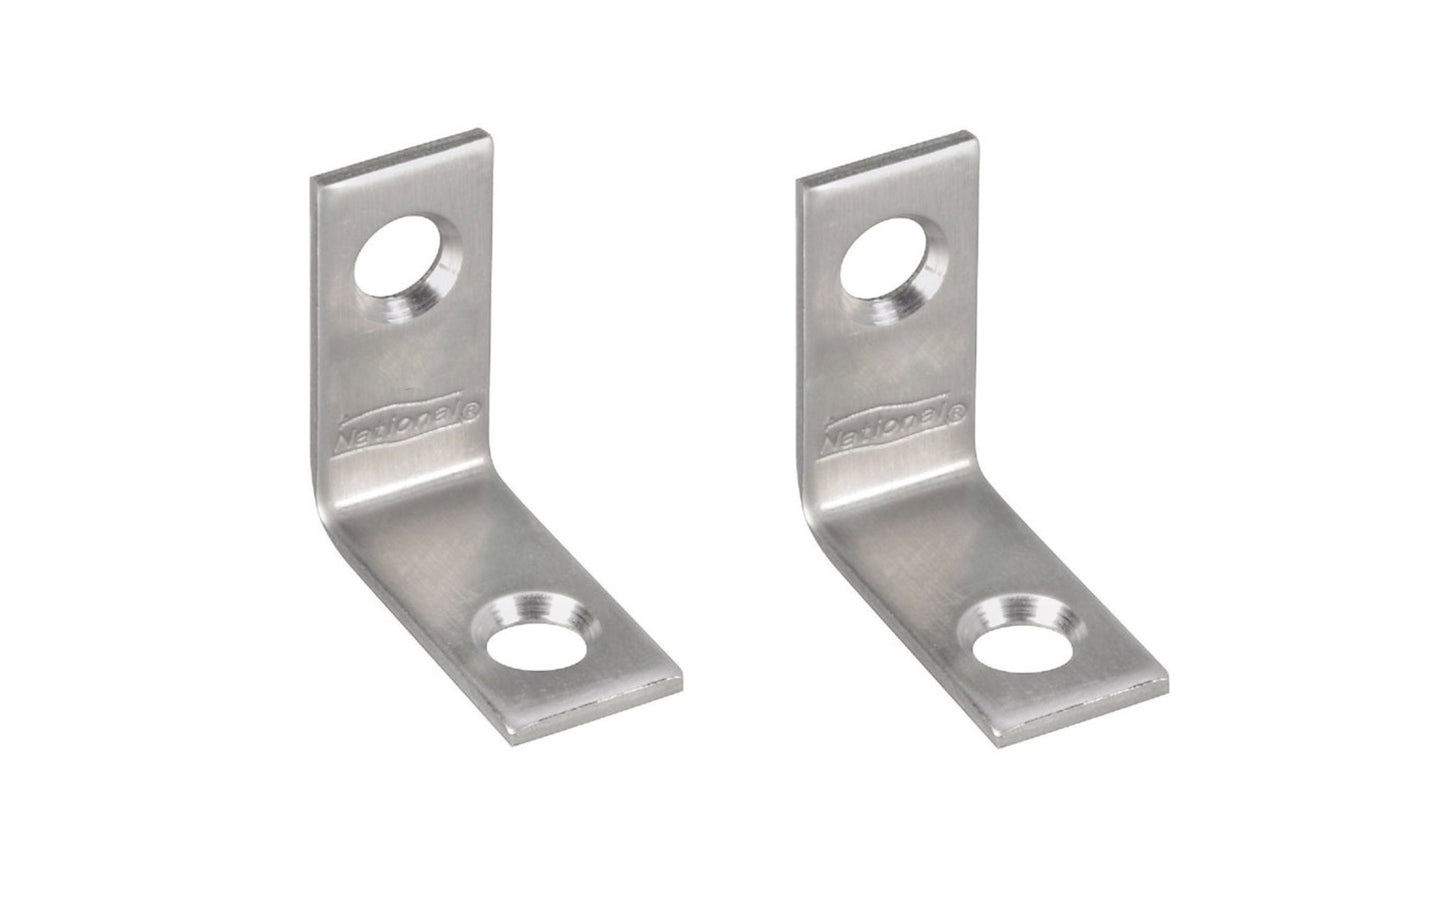 1" x 1/2" Stainless Corner Brace is designed for furniture, countertops, shelving support, chests, cabinets. For repair of items in workshop, & industrial applications. Stainless steel material for corrosion protection. Sold as a pair of corner irons. Includes fasteners. 2 pack. National Hardware Model No. N348-292.